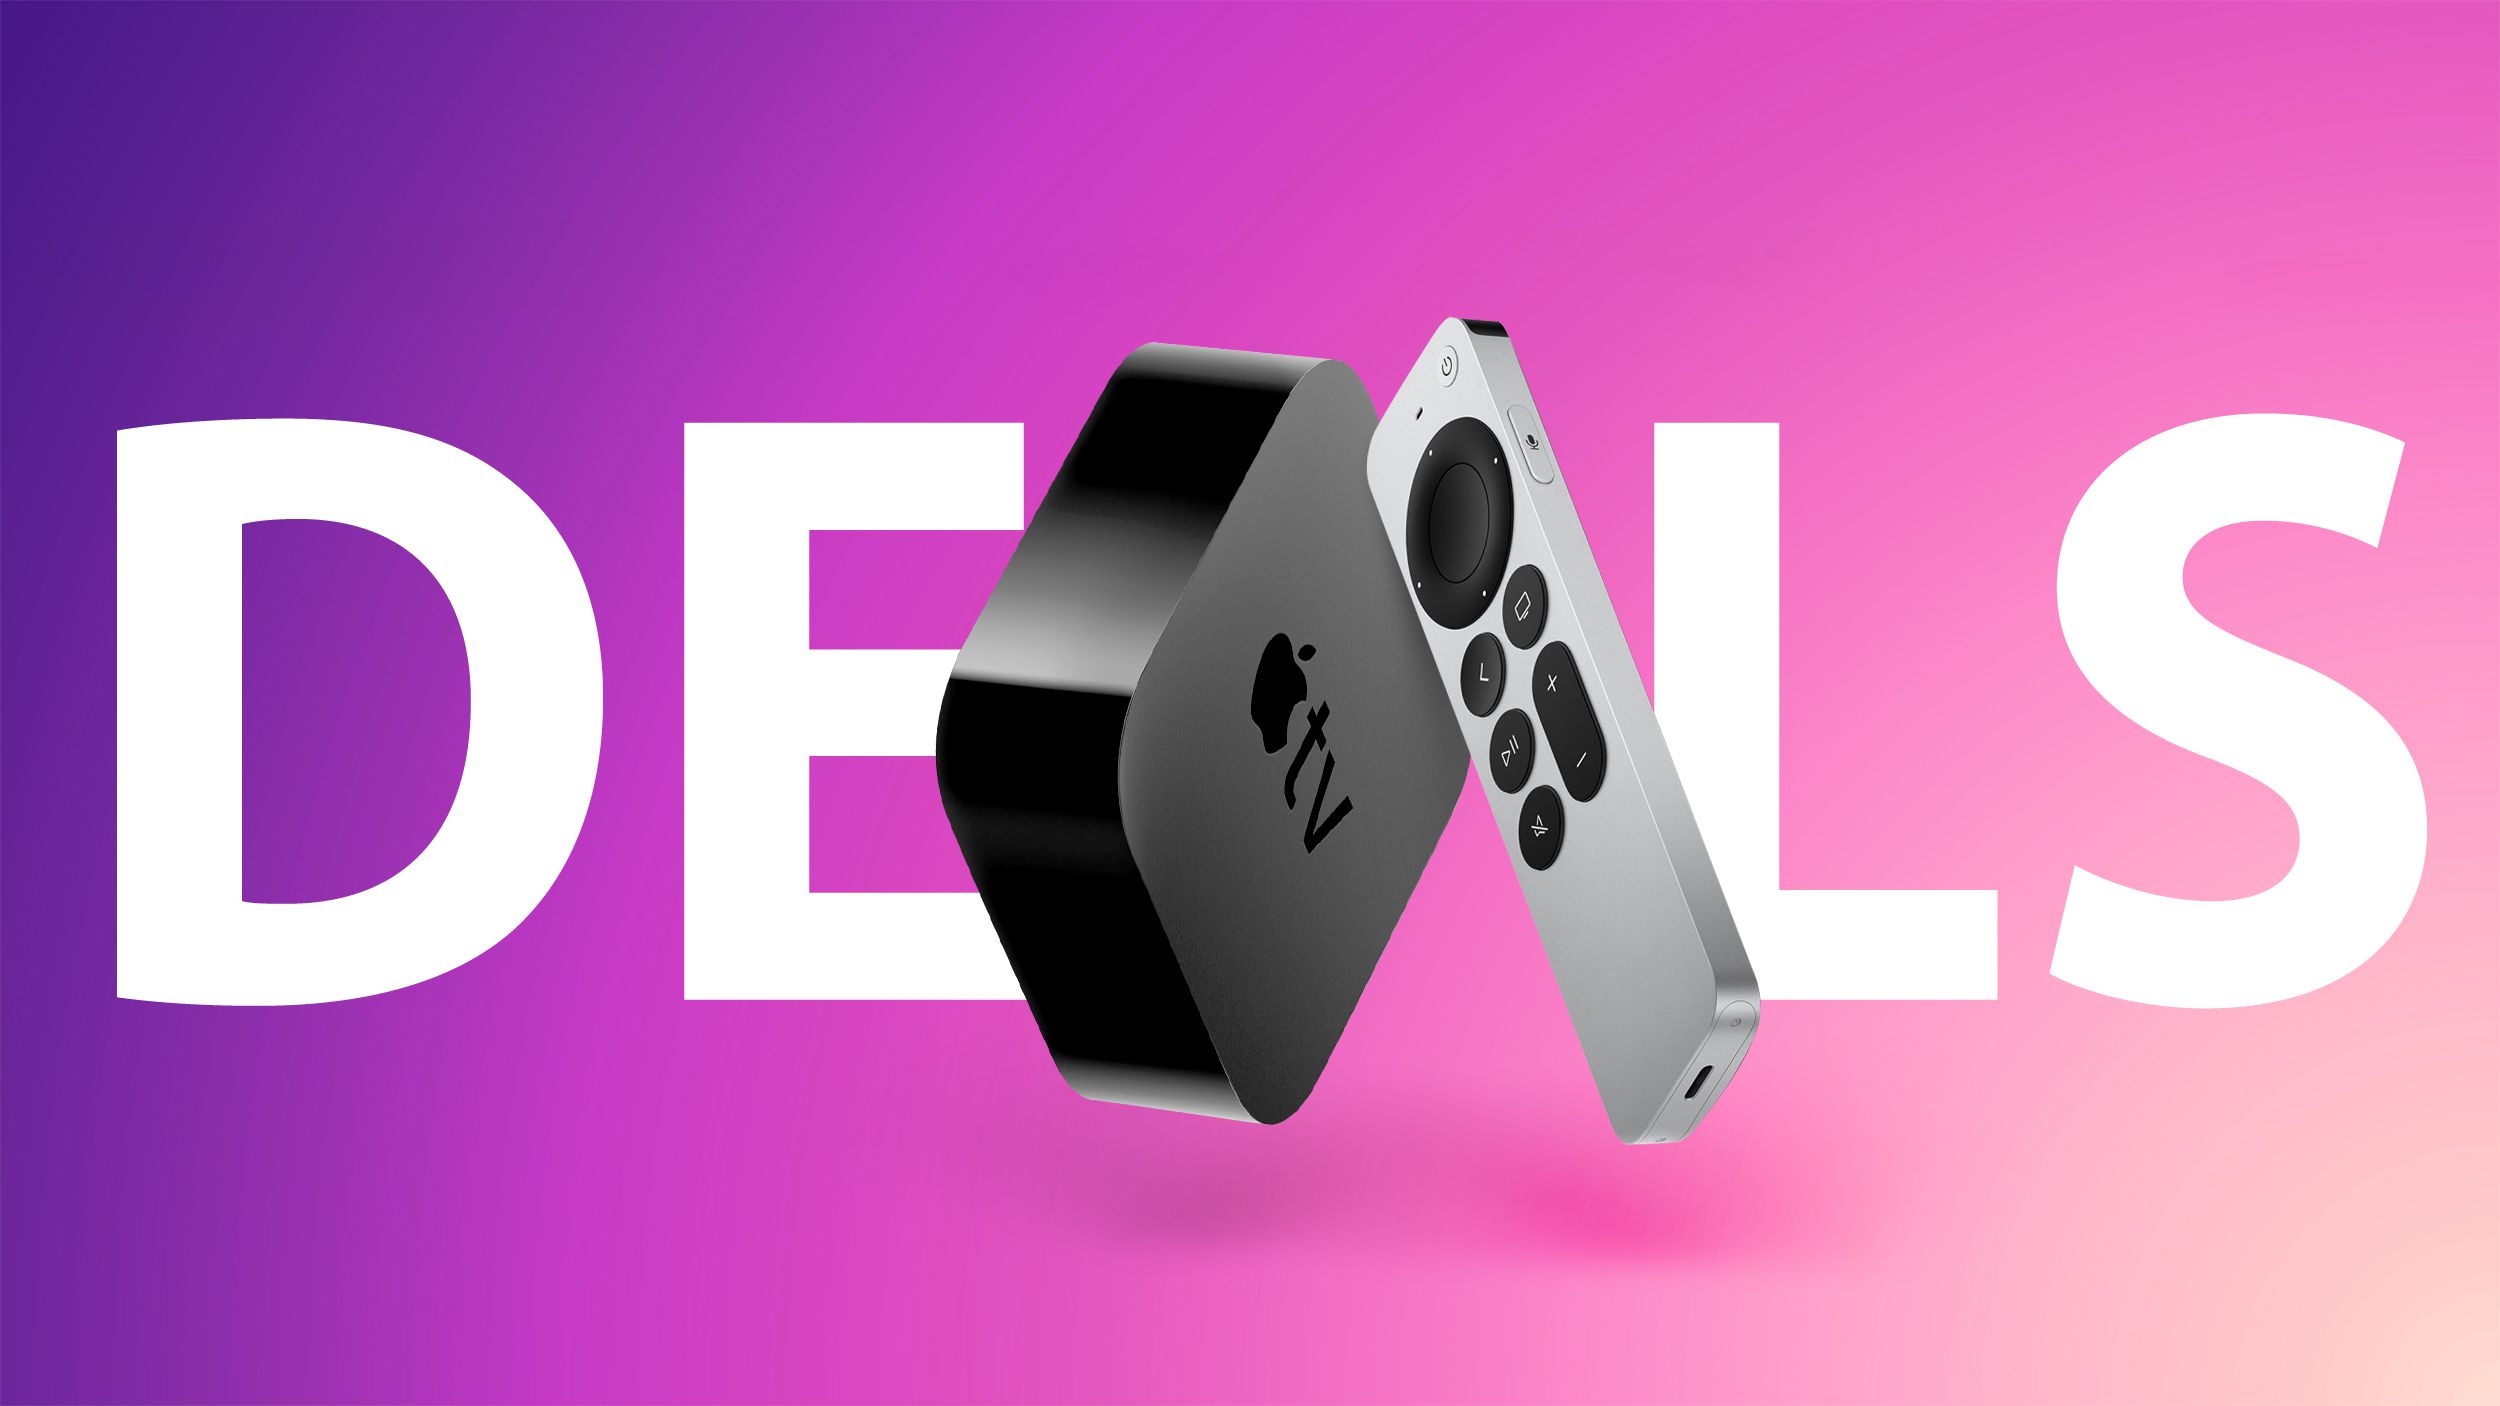 Deals: Amazon Has Apple TV HD for $99 and 4K Models From $120 in Latest Sales